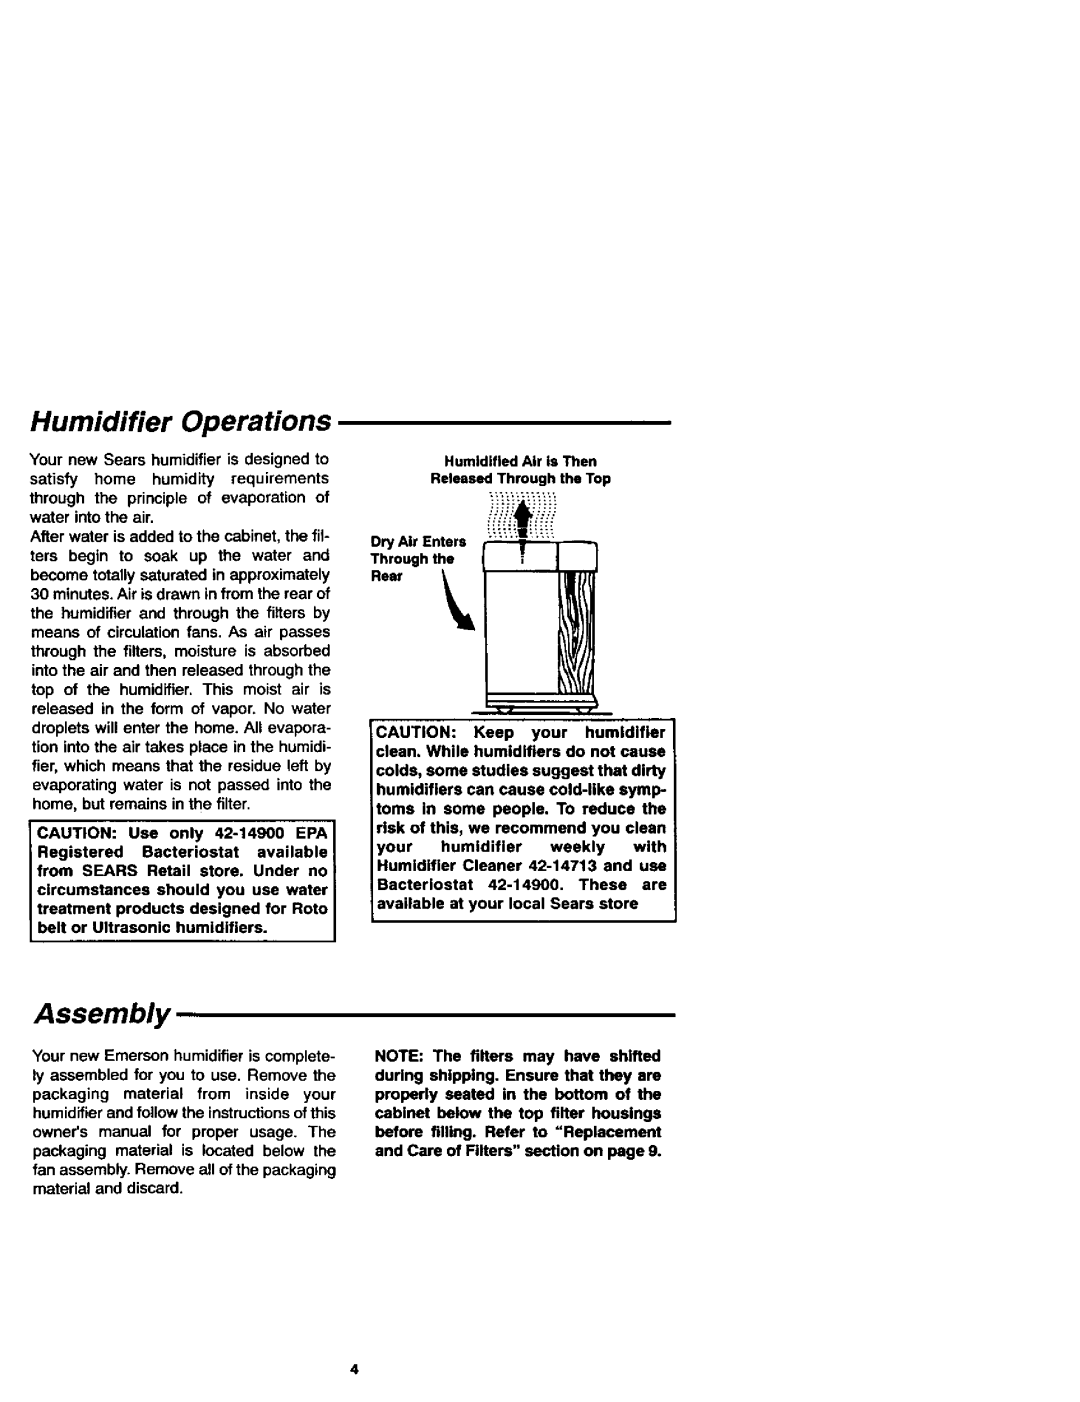 Sears 758.144131 owner manual Humidifier Operations, Assembly 